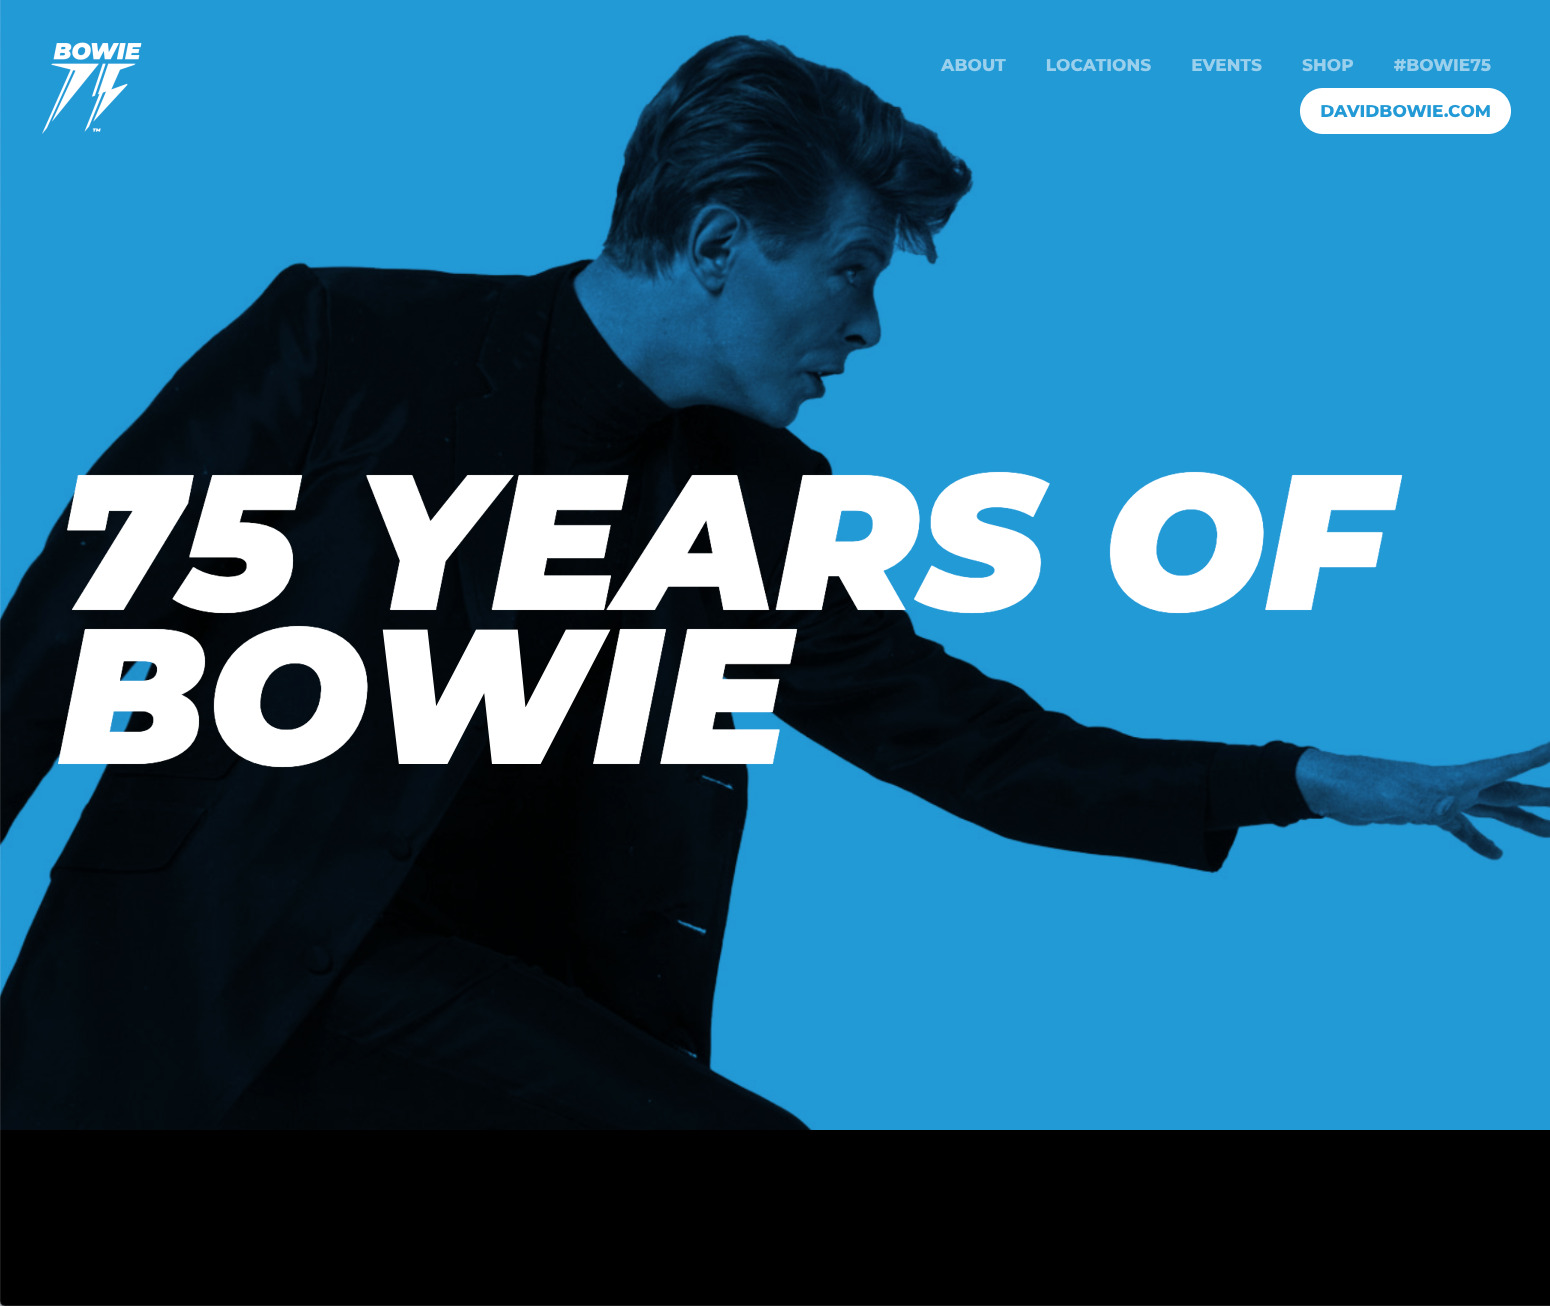 Homepage of the Bowie 75 website; singer David Bowie is featured reaching out to the right 